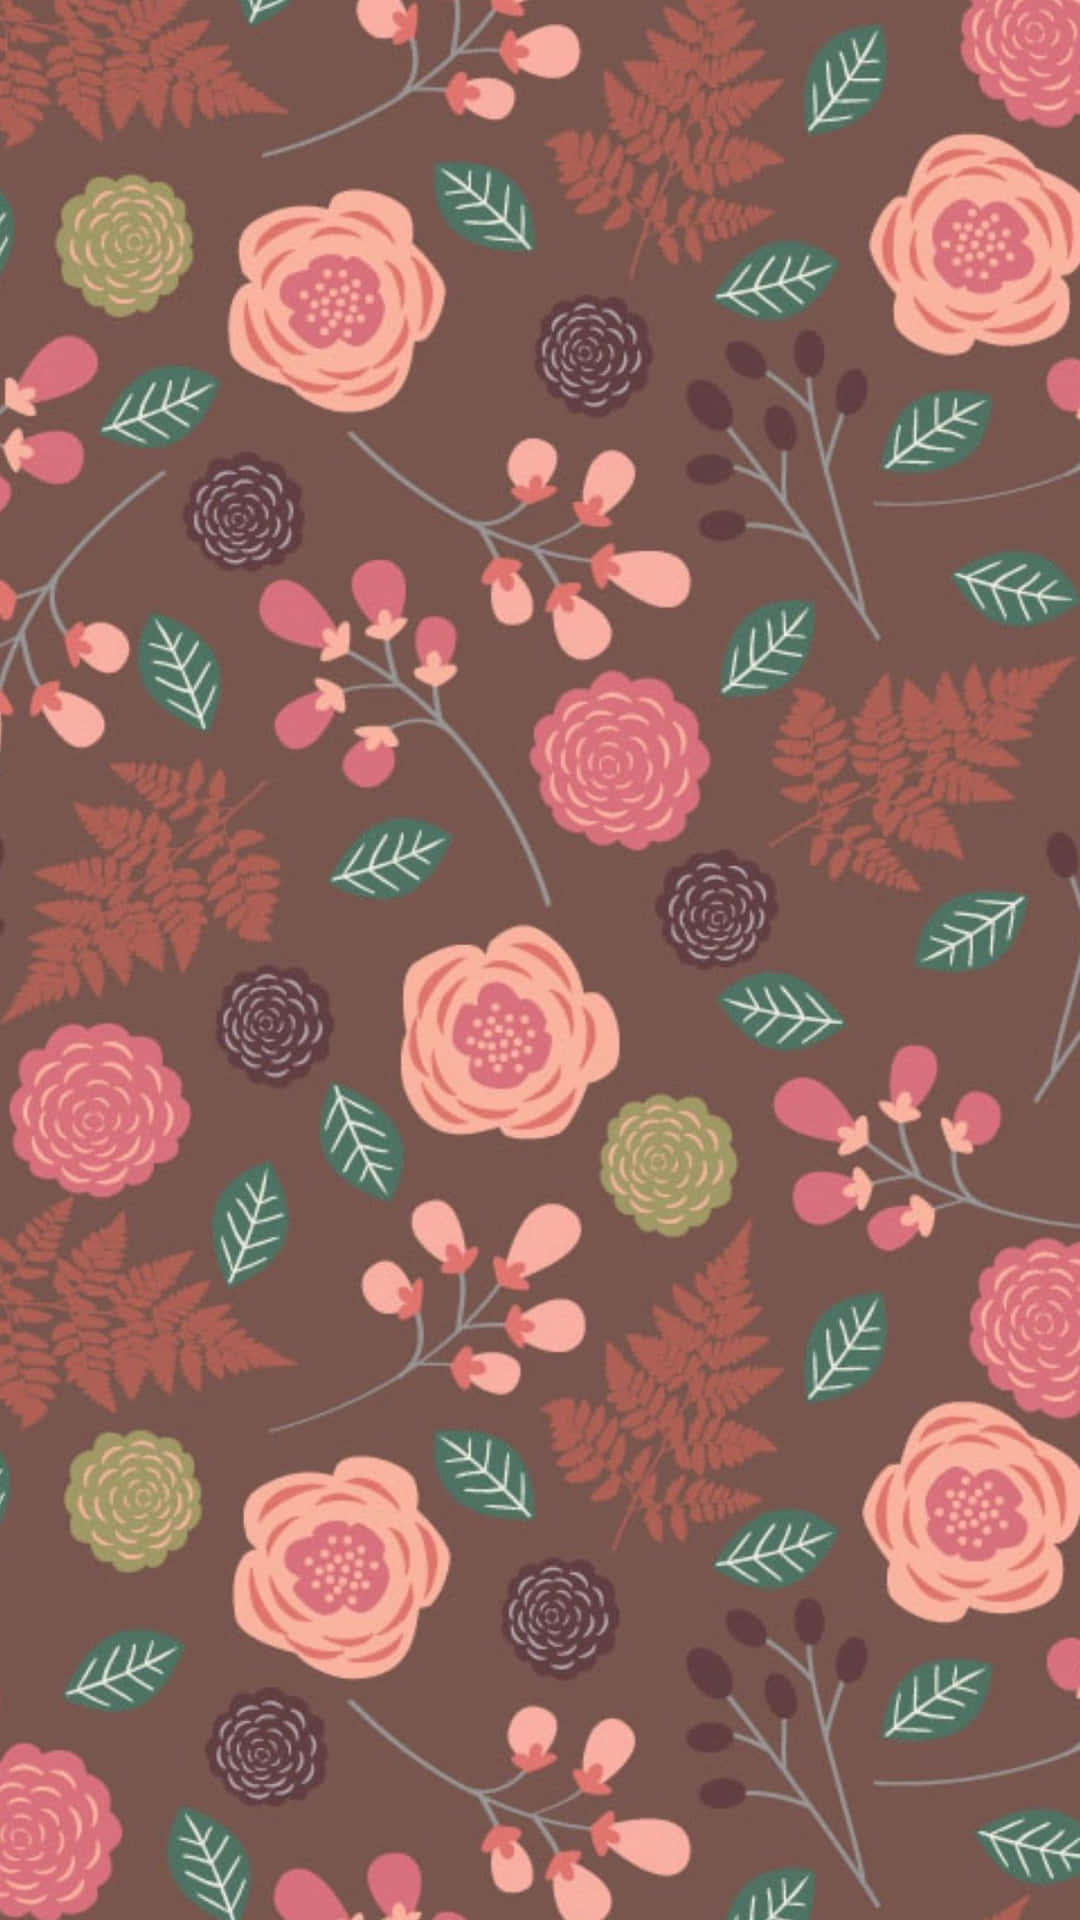 A Floral Pattern With Pink And Brown Flowers